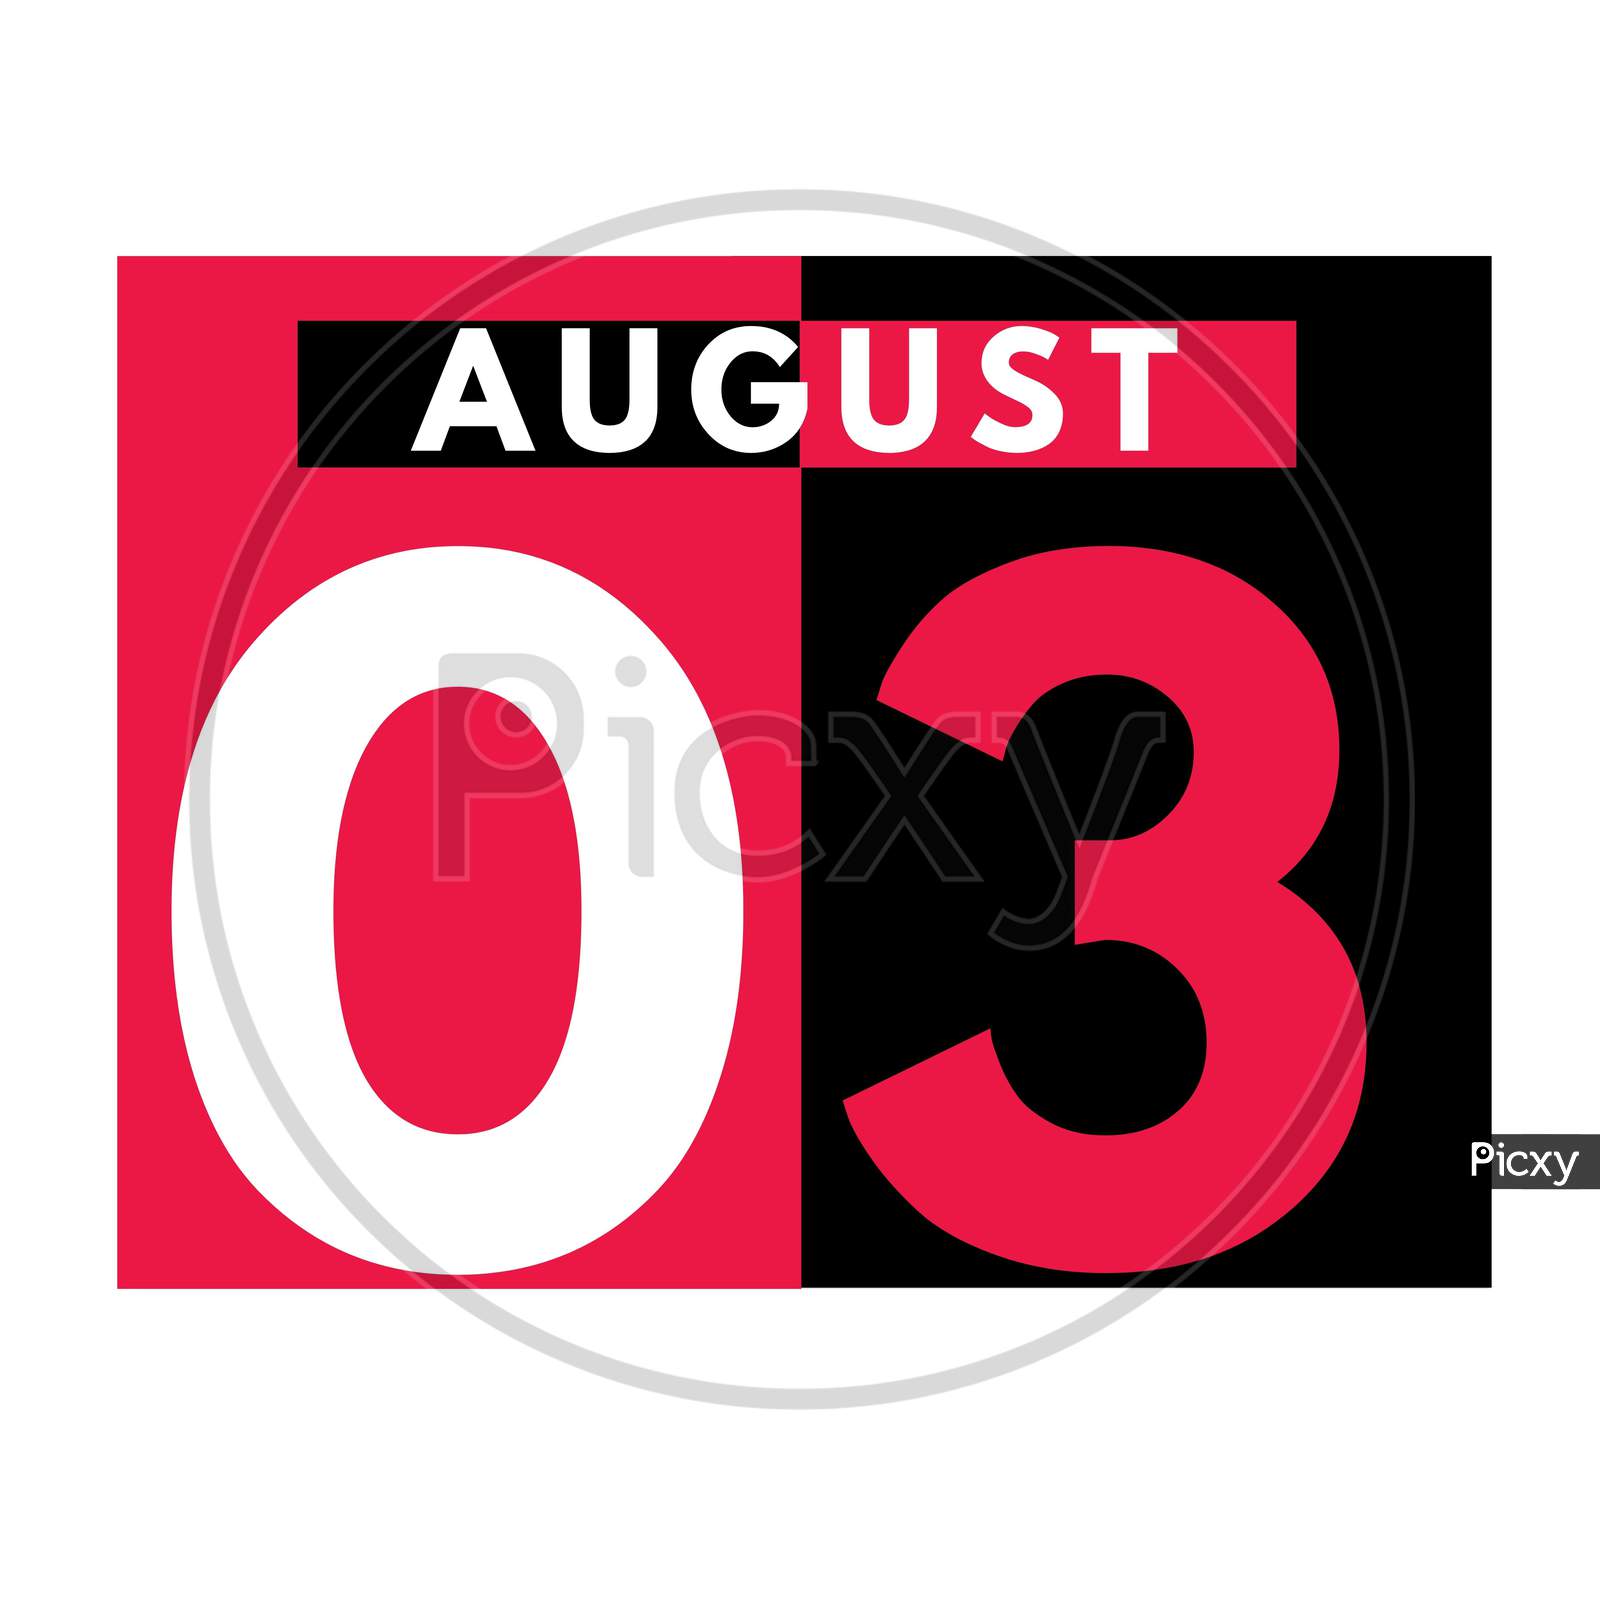 August 3 . Modern Daily Calendar Icon .Date ,Day, Month .Calendar For The Month Of August